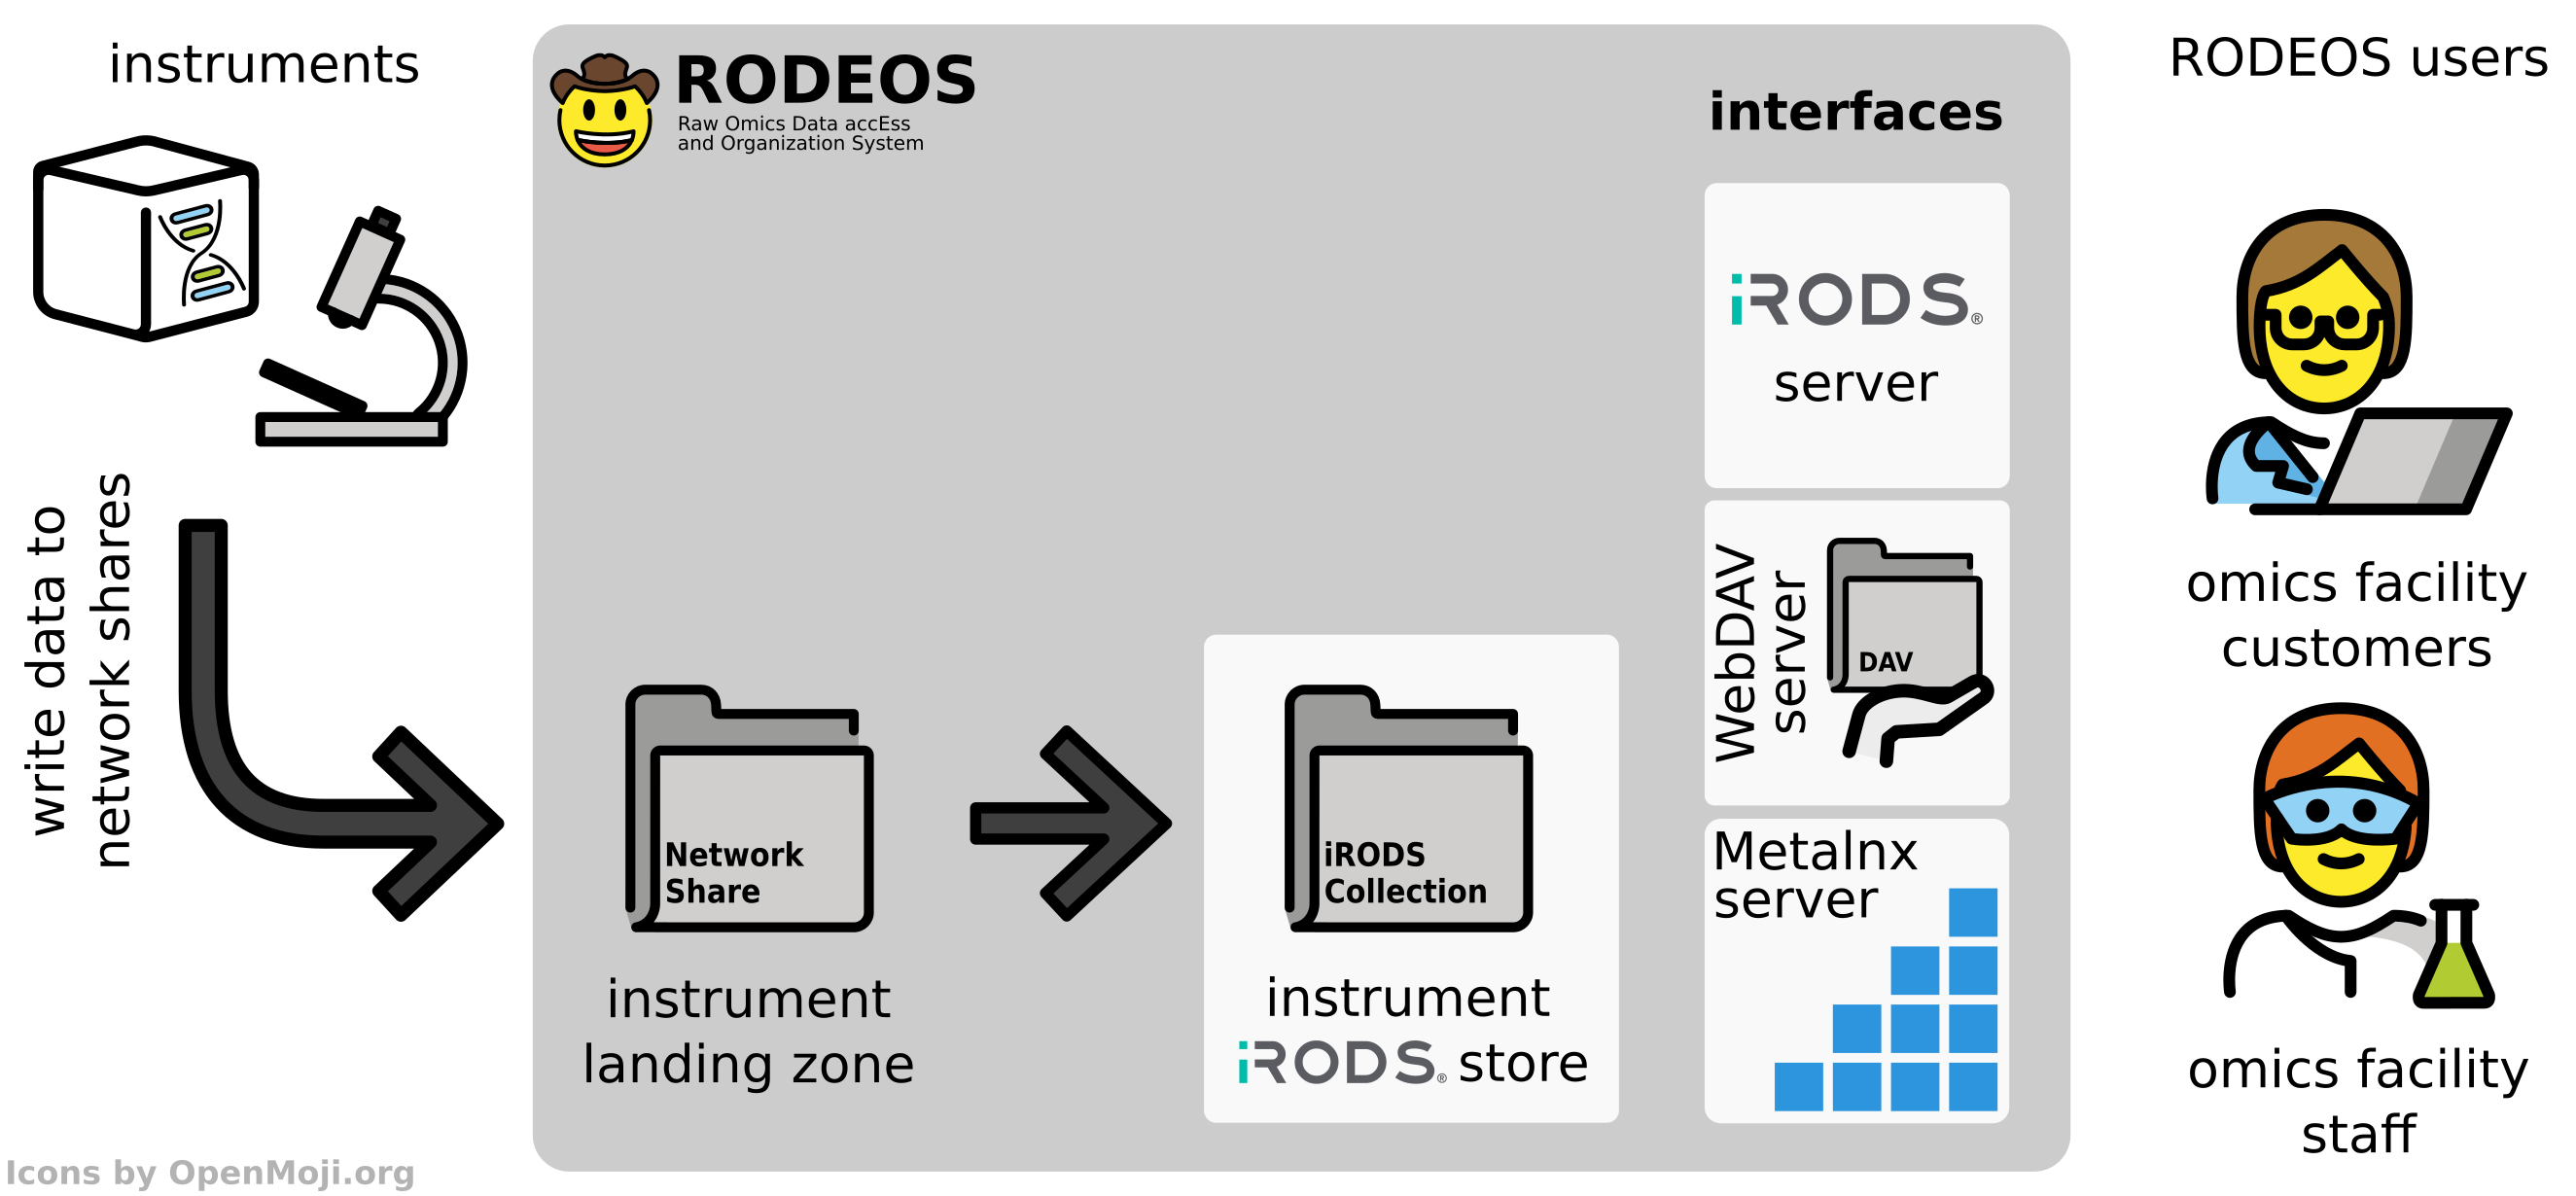 overview of the RODEOS system